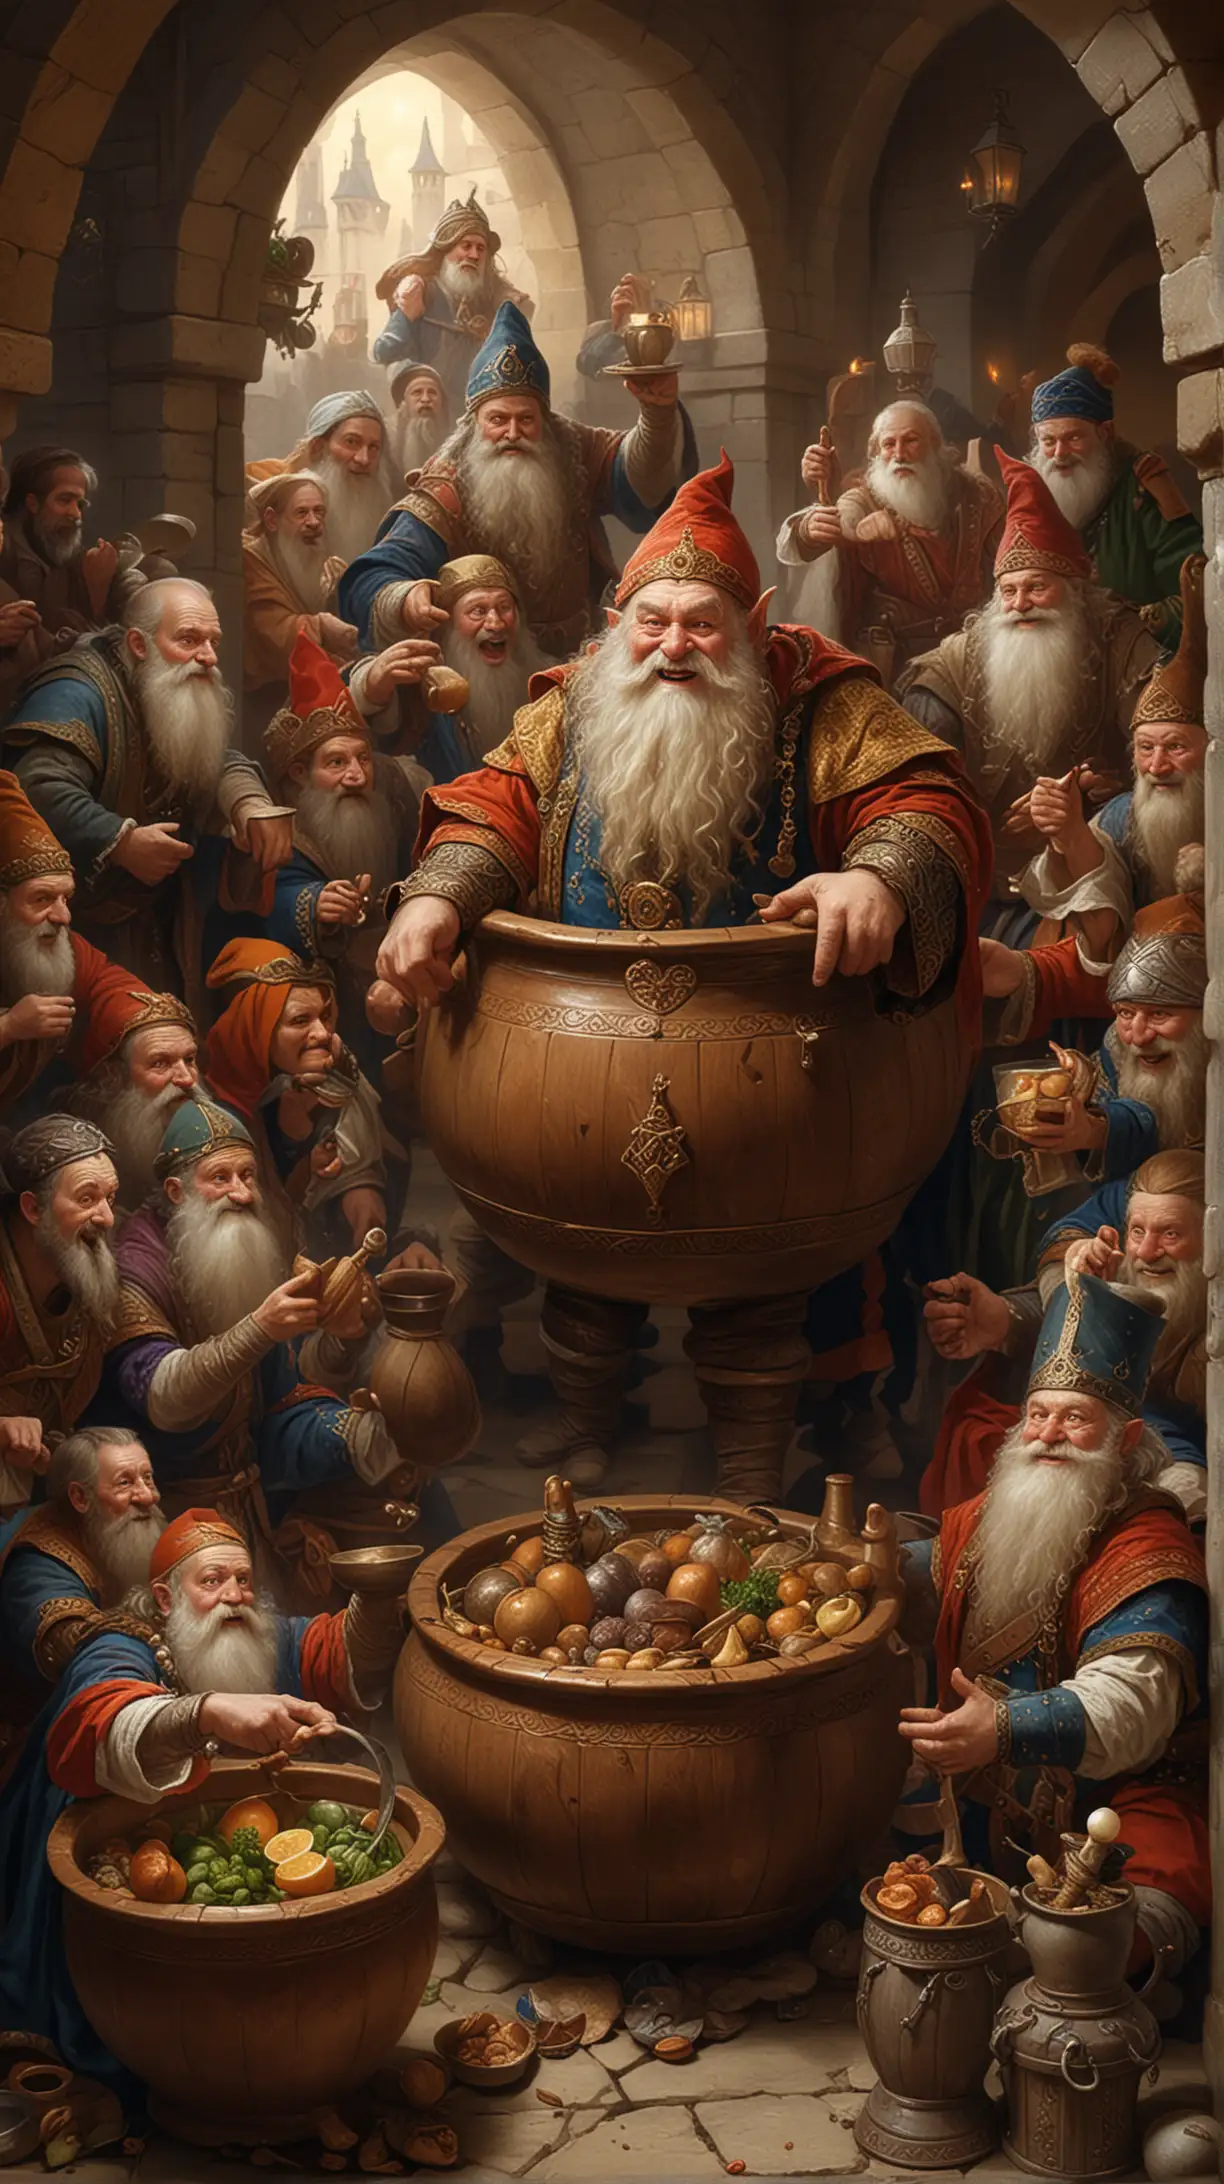 A royal banquet scene with a dwarf emerging from a pot, surprising the guests.